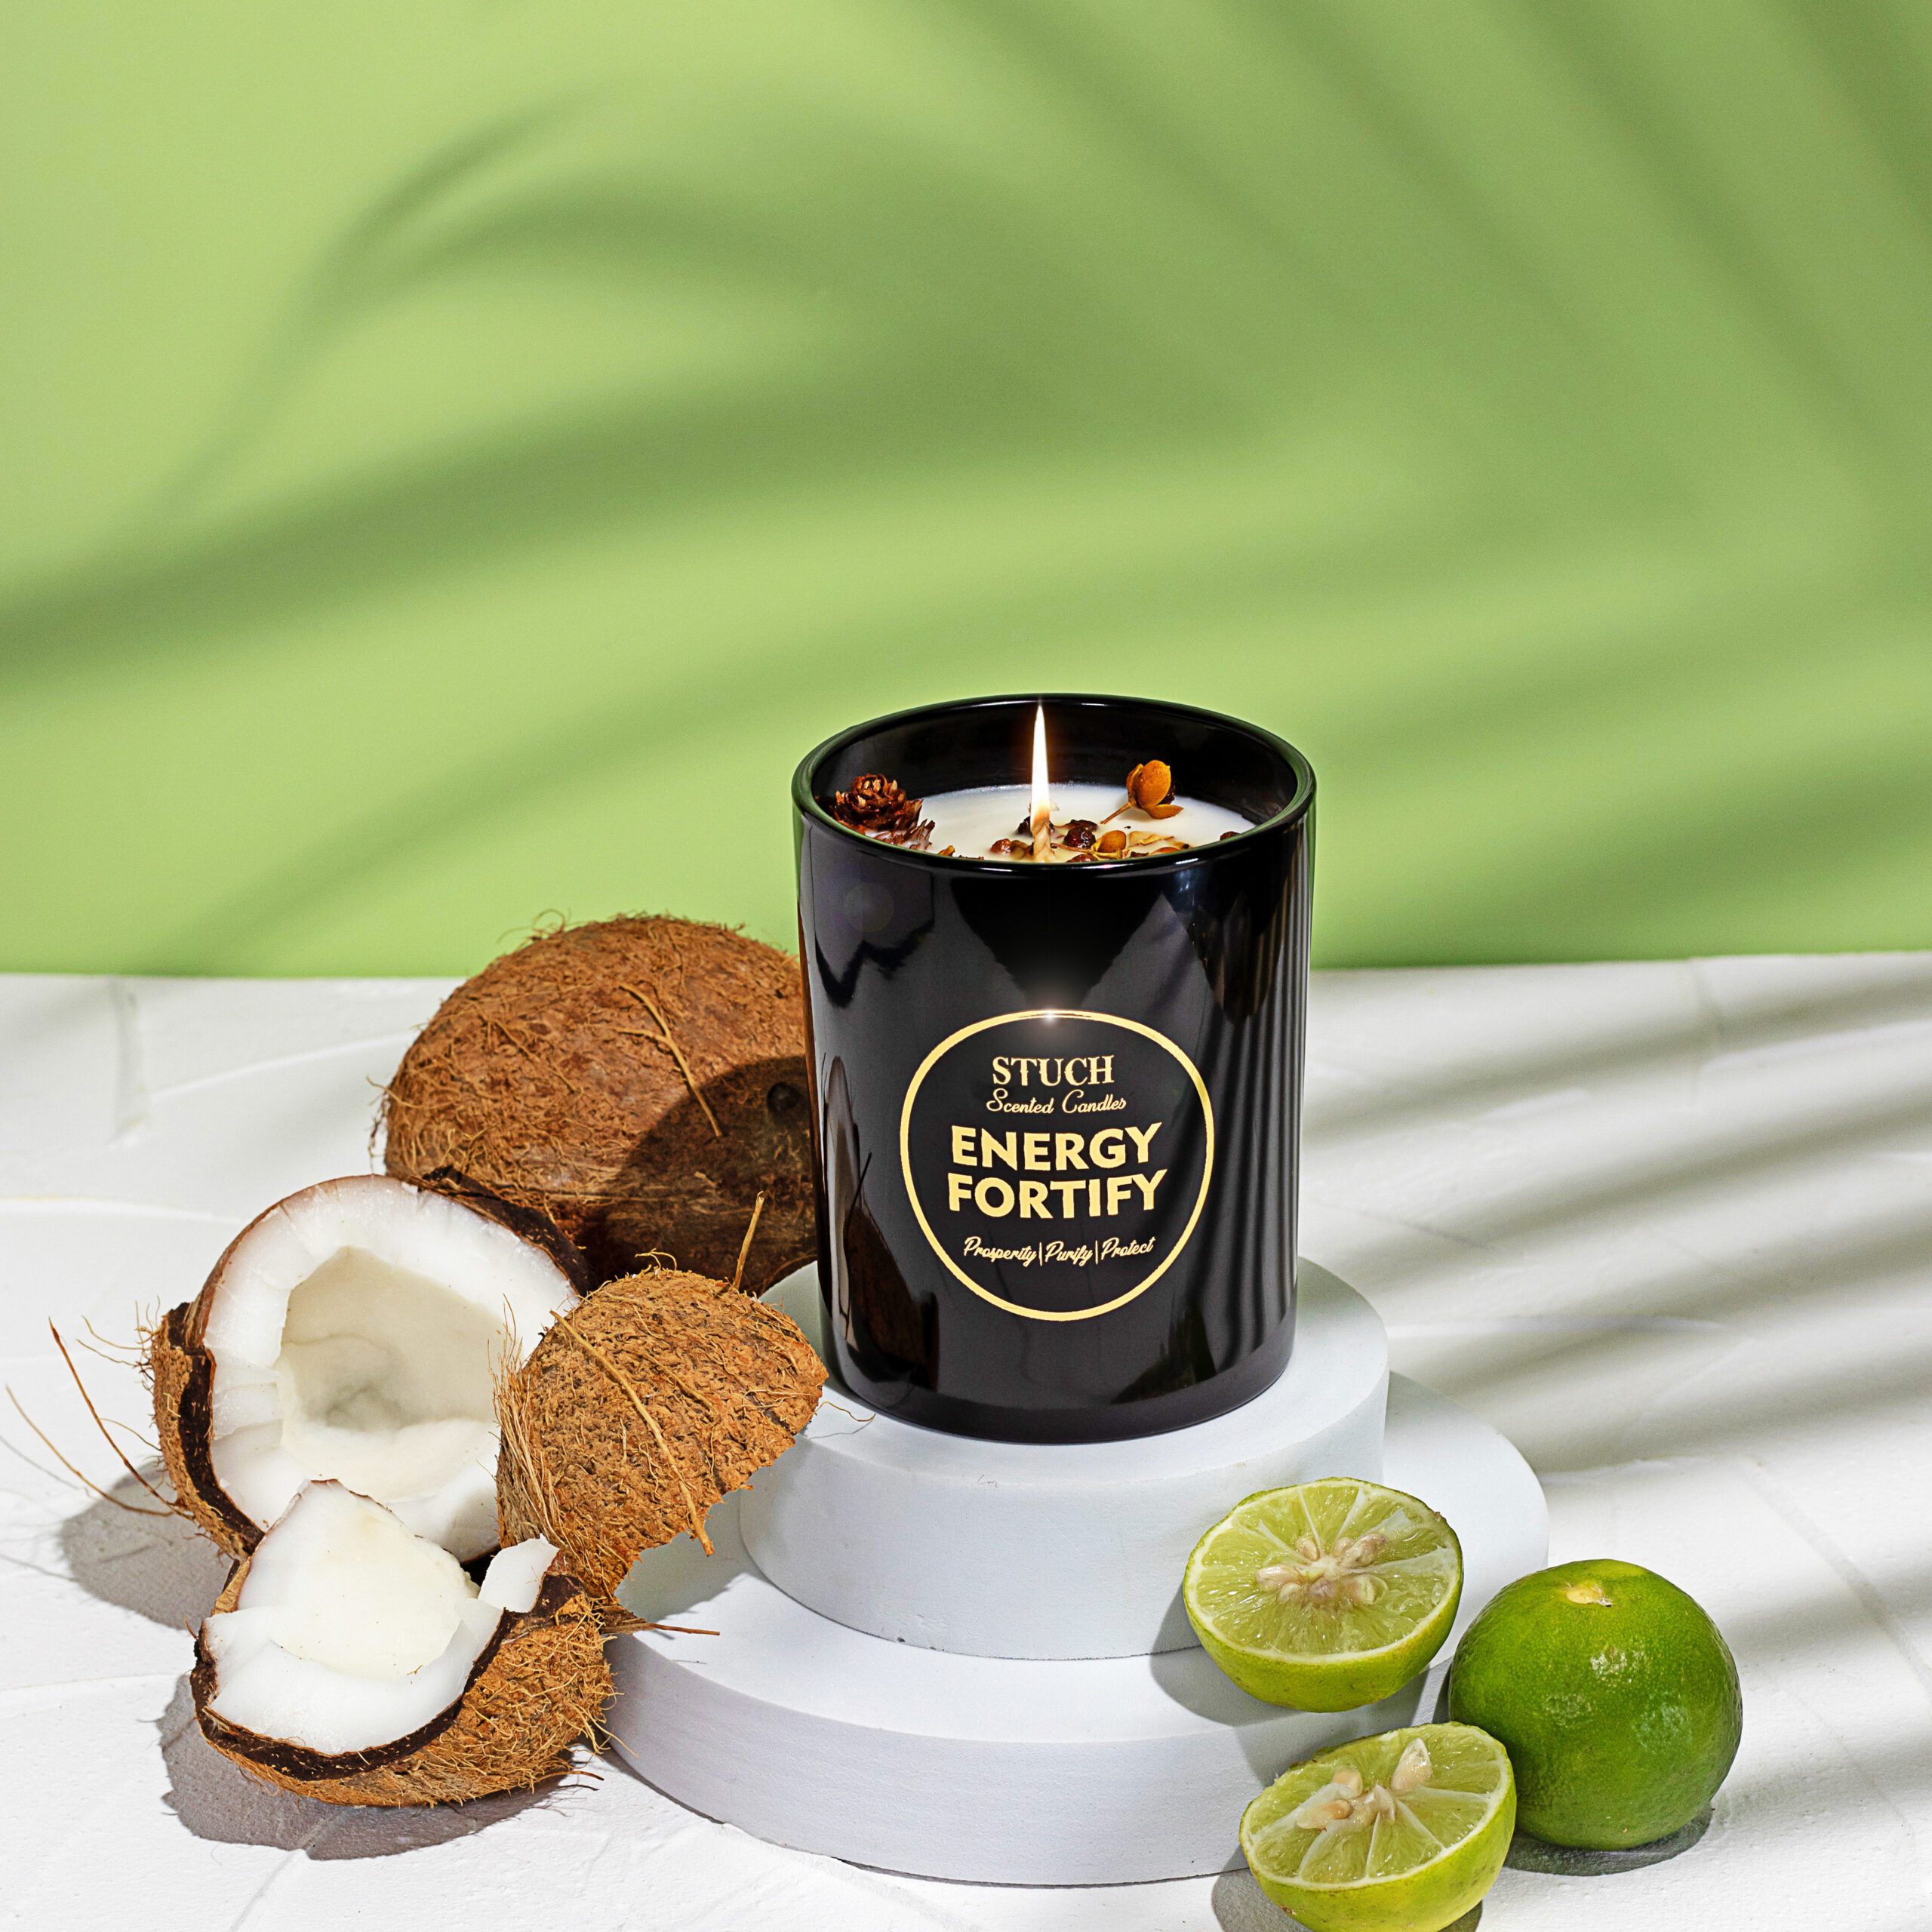 Energy fortify scented candle